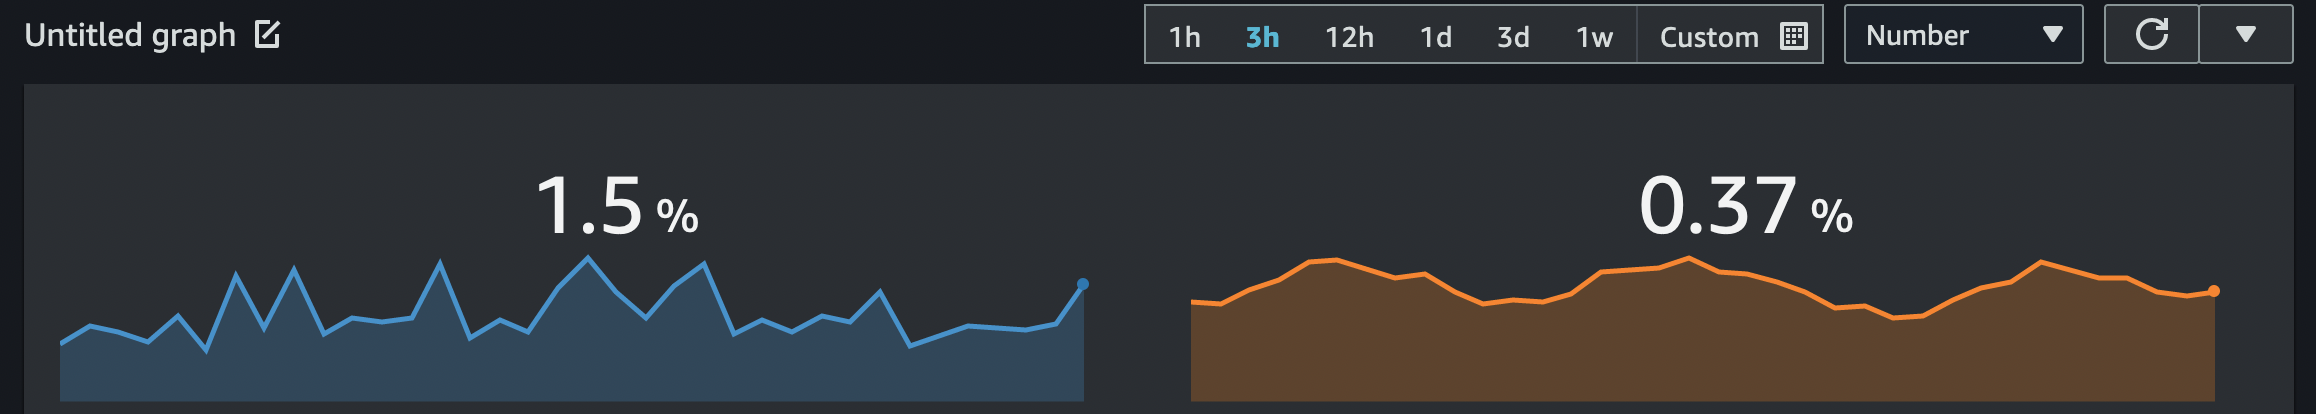 
                    A
                        screenshot of
                        the
                        number widget
                        that
                        focuses
                        on
                        the sparkline
                        feature
                